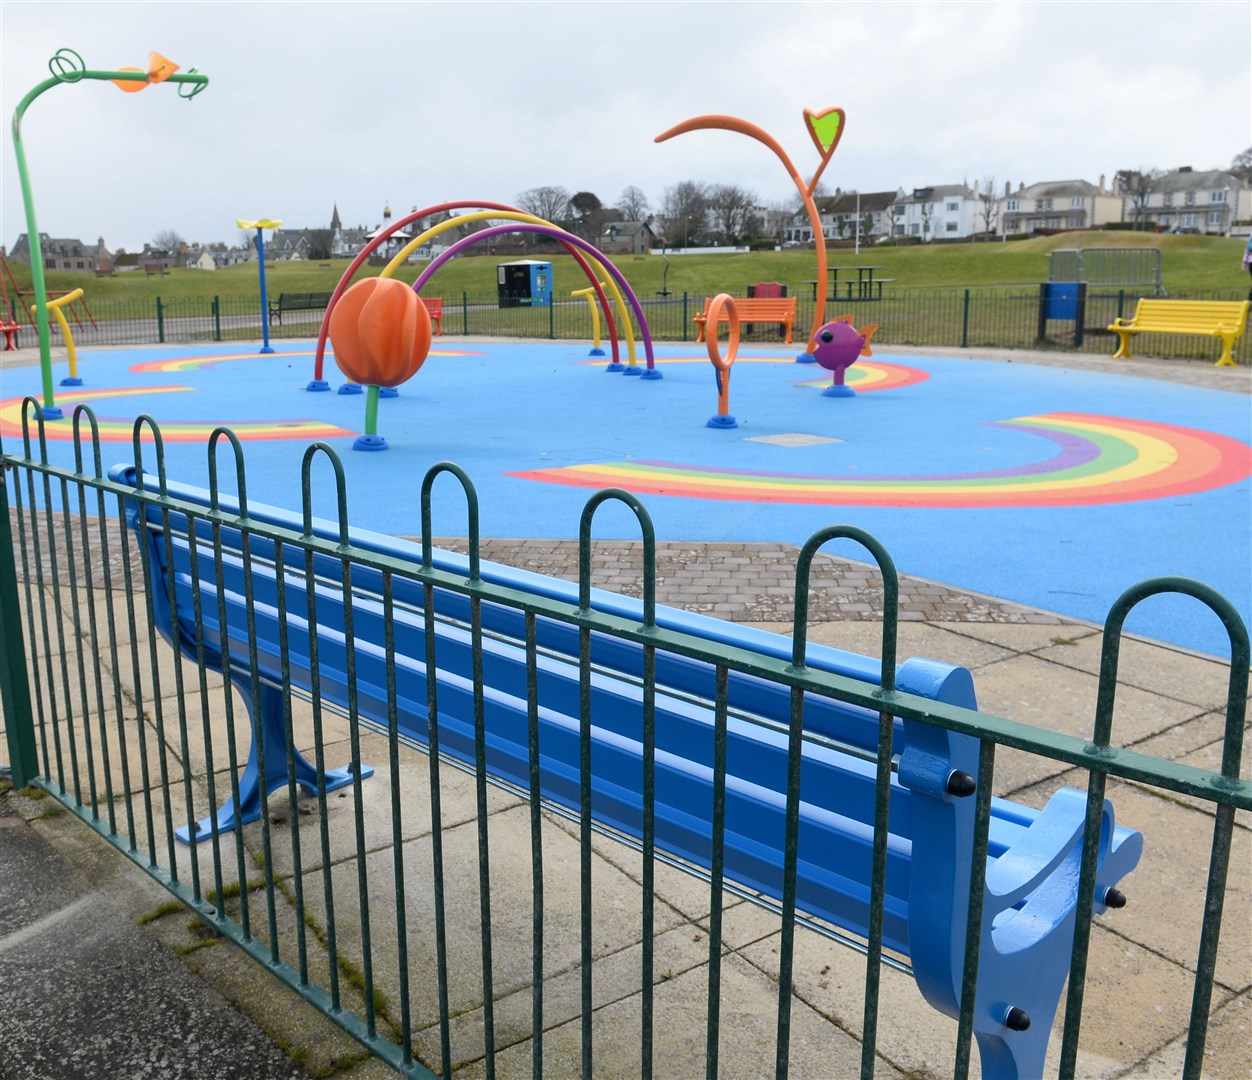 Nairn's very colourful Splashpad. Picture: Gary Anthony.